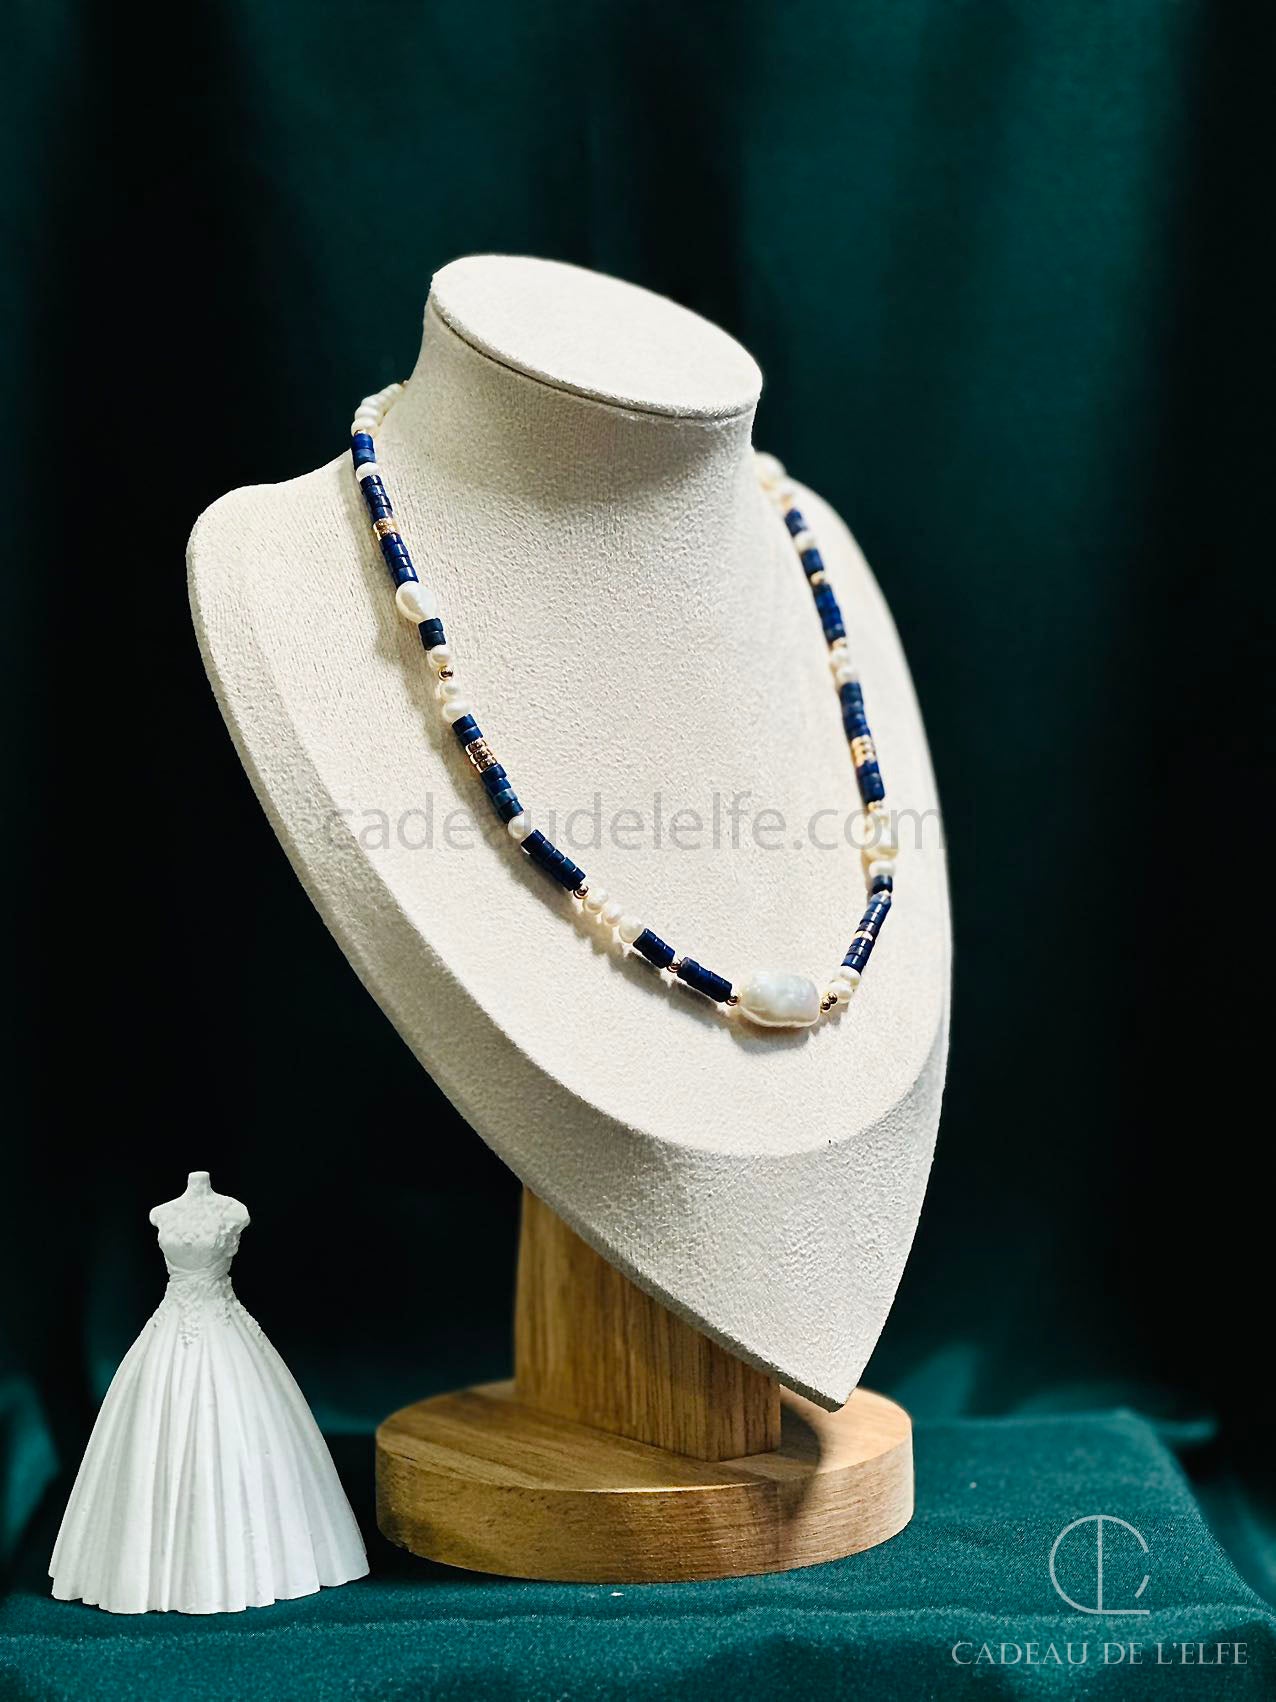 Blue Dongling jade and pearls Necklace